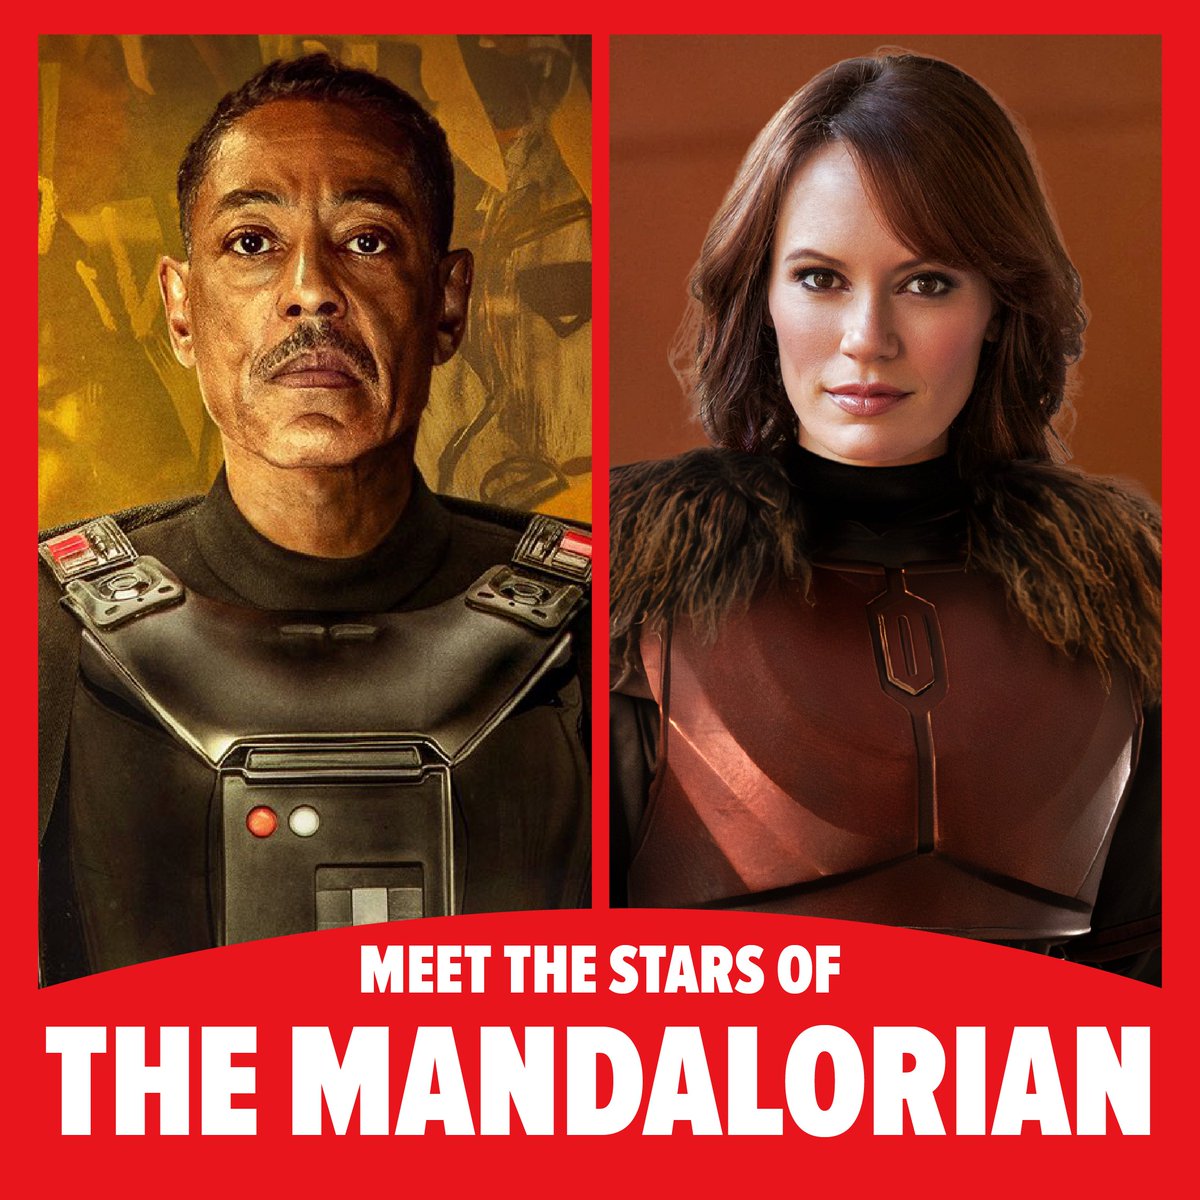 Polish your armour and prepare for battle because Giancarlo Esposito (Moff Gideon) and Emily Swallow (The Armorer) from The Mandalorian are coming to FAN EXPO Canada this August. This is the way to get your tickets: spr.ly/6012jyF0s